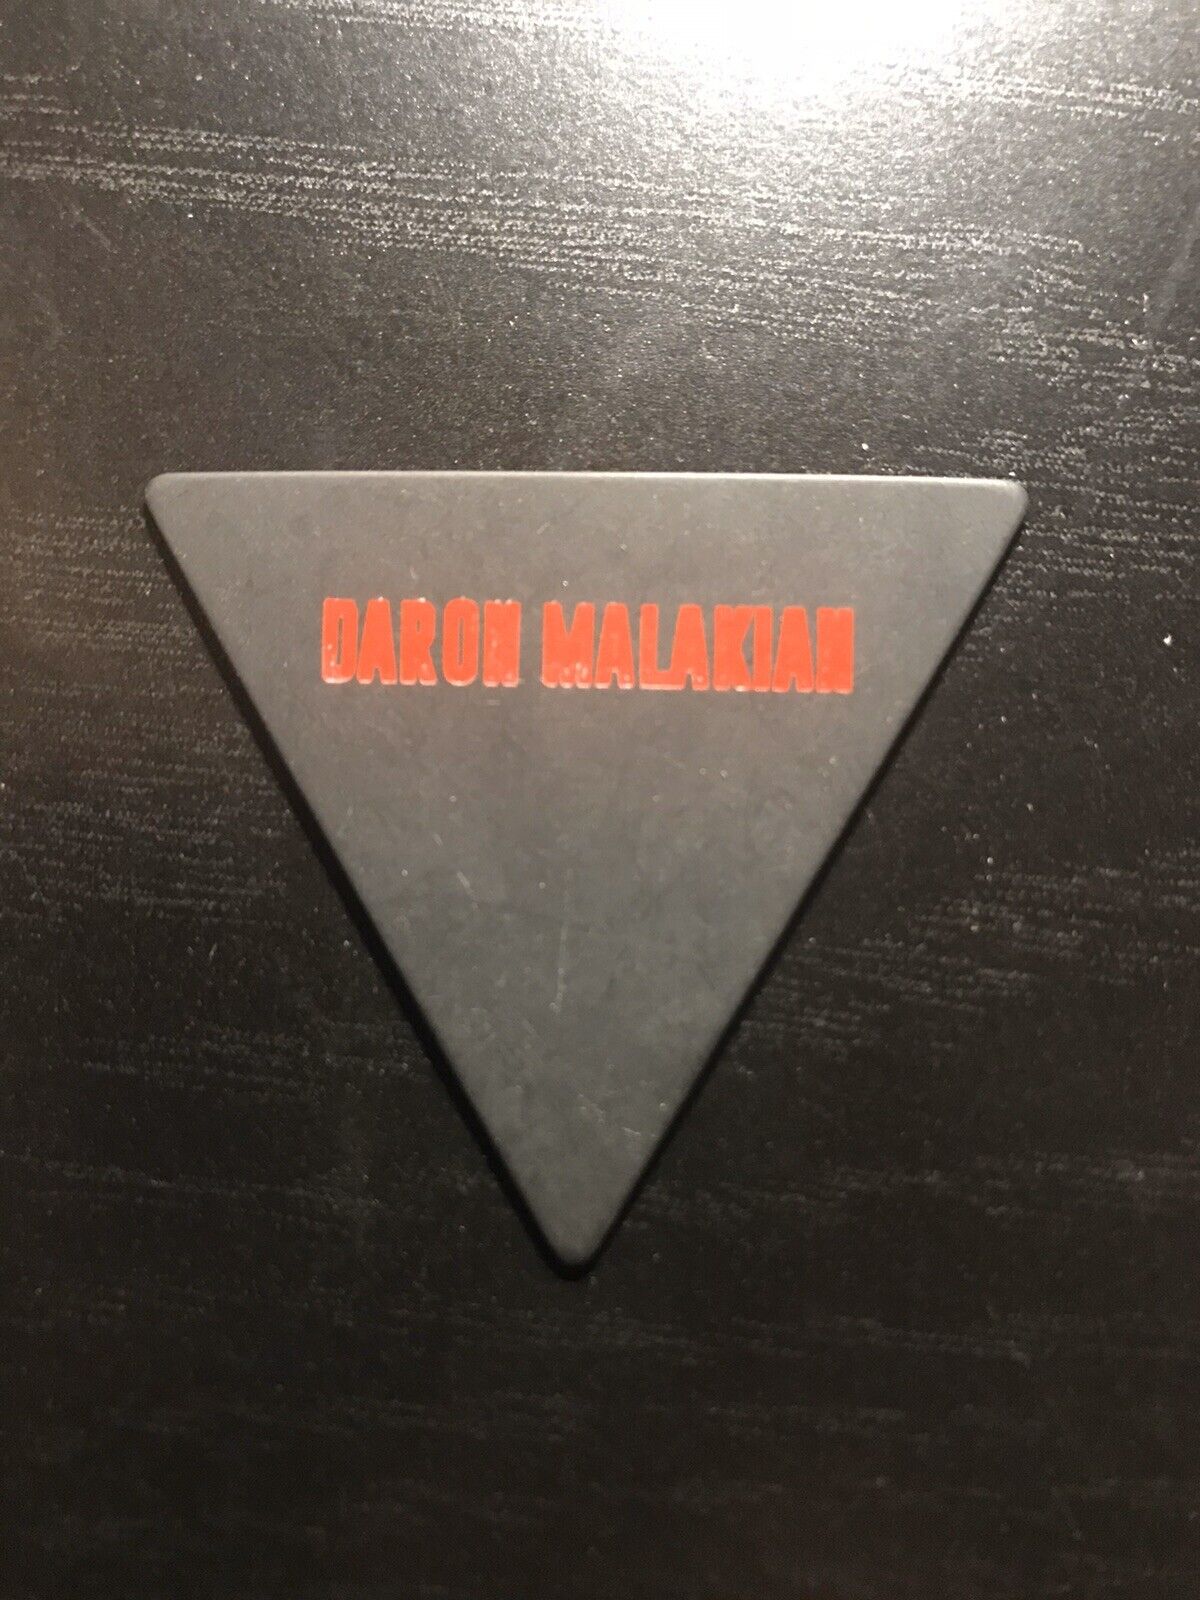 System Of A Down “new” Daron Malakian Guitar Pick